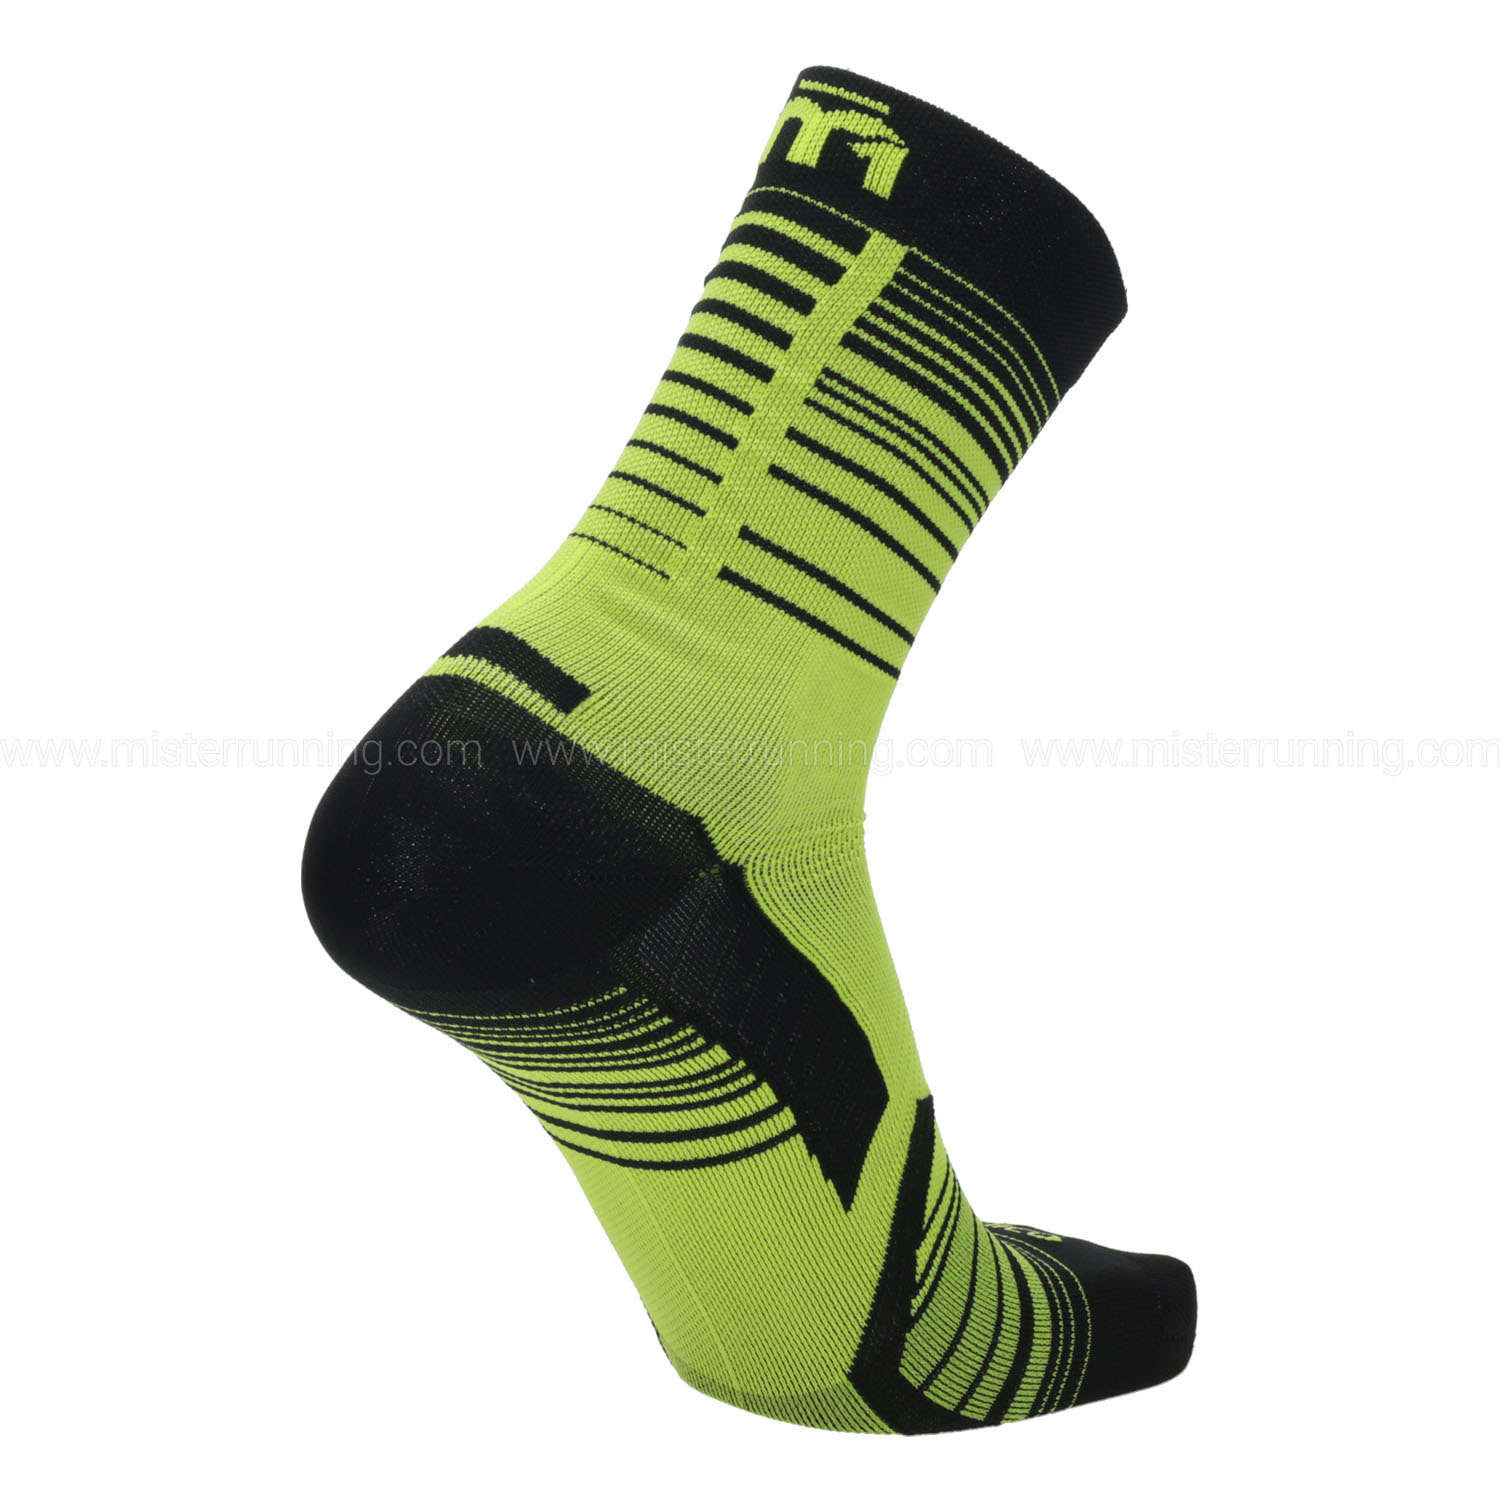 Mico M1 Light Weight Calcetines - Giallo Fluo